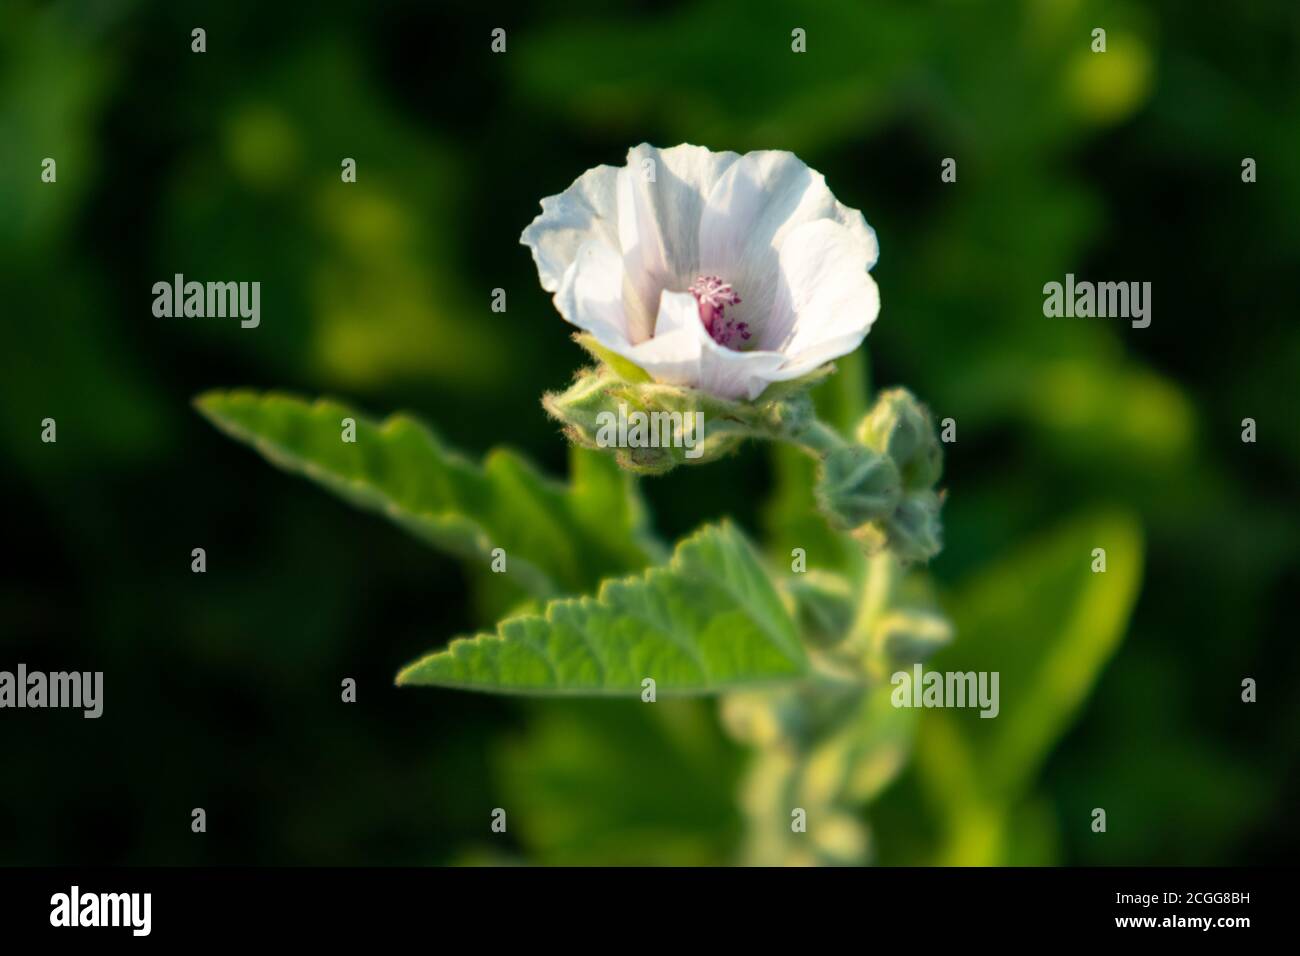 Althaea officinalis, or marsh-mallow, family Malvaceae. Pale pink tender blooming flower with leaves in vibrant dark greenery background Stock Photo